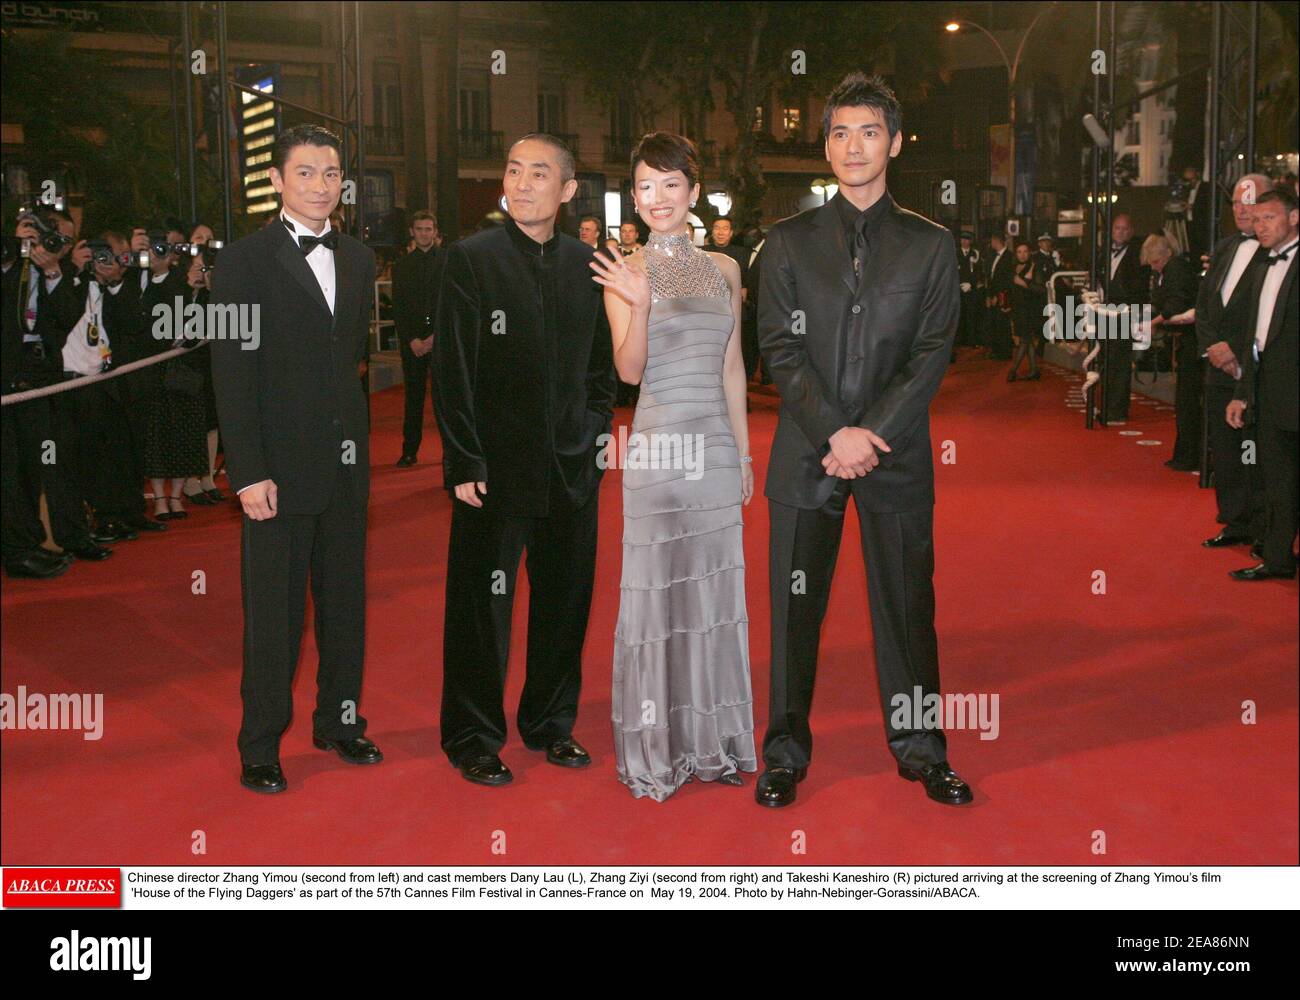 Chinese director Zhang Yimou (second from left) and cast members Dany Lau (L), Zhang Ziyi (second from right) and Takeshi Kaneshiro (R) pictured arriving at the screening of Zhang Yimou's film 'House of the Flying Daggers' as part of the 57th Cannes Film Festival in Cannes-France on May 19, 2004. Photo by Hahn-Nebinger-Gorassini/ABACA. Stock Photo